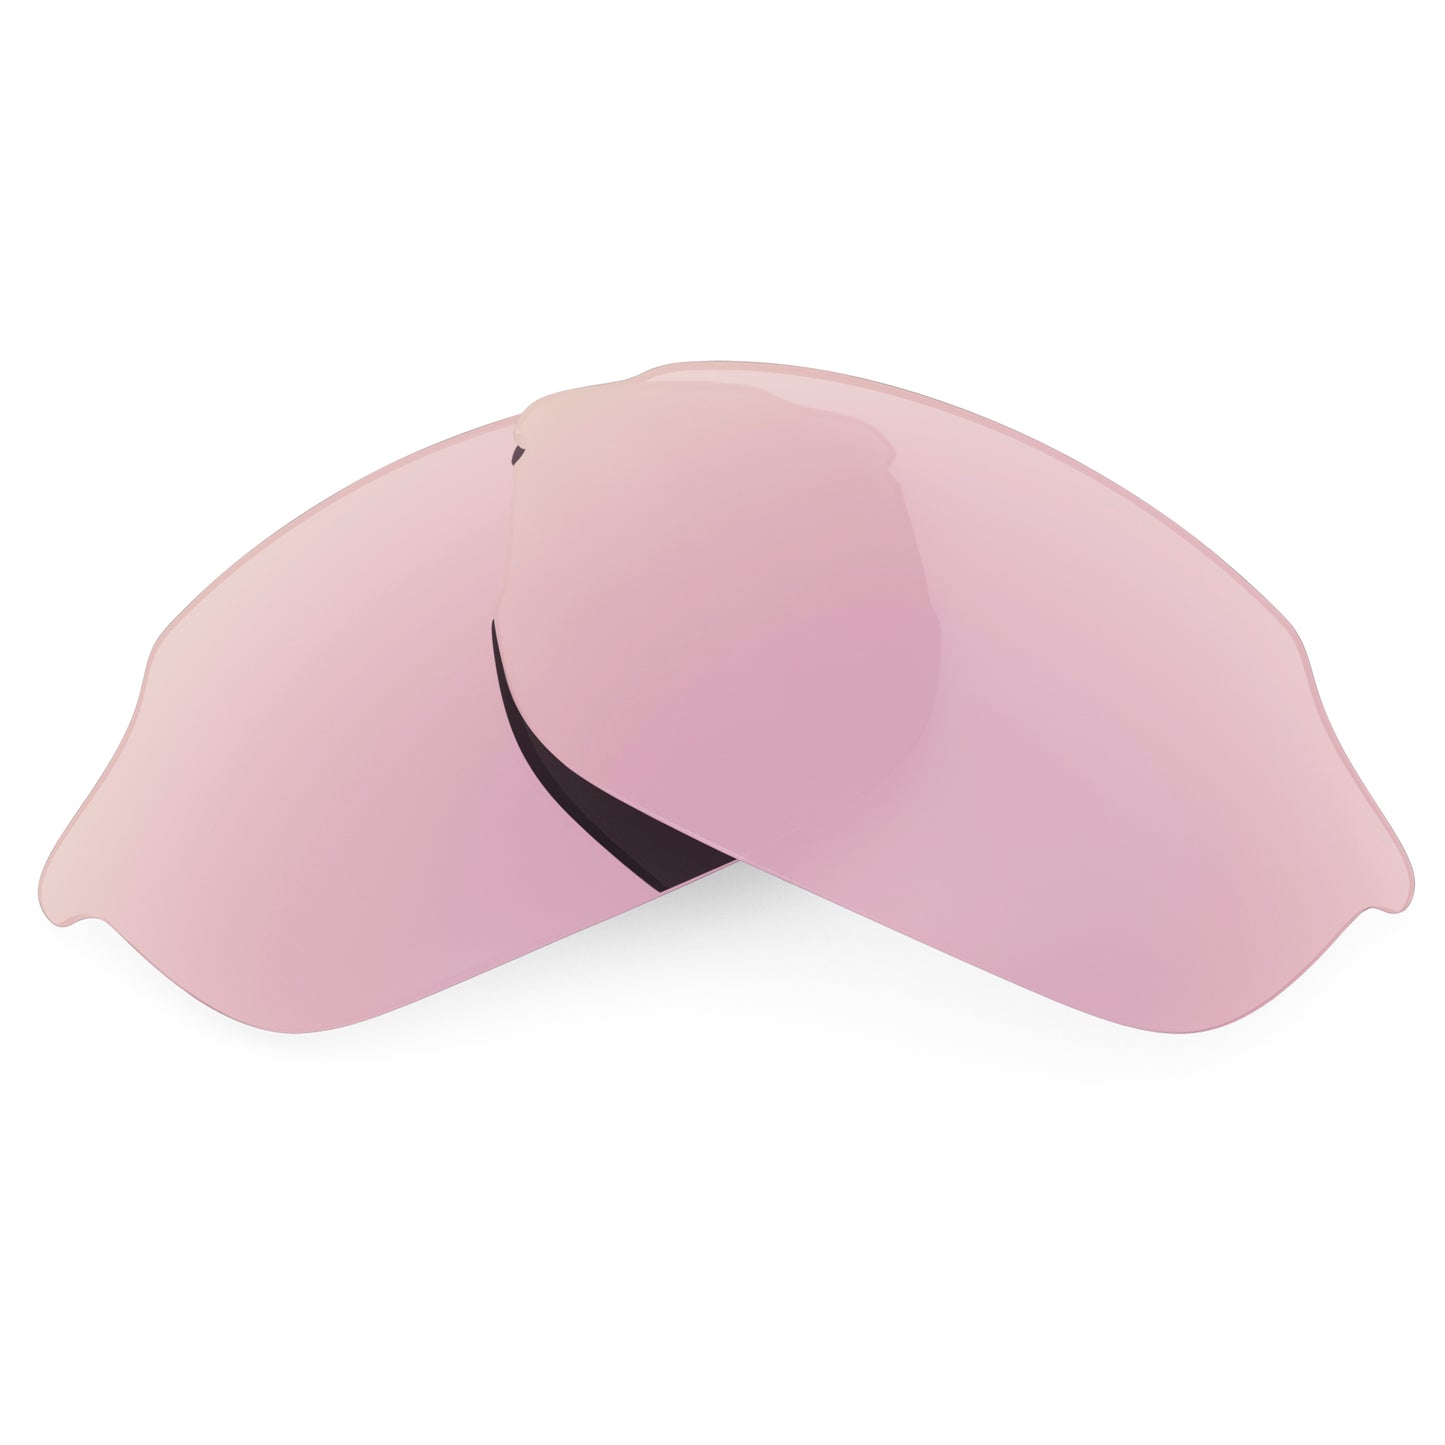 Revant replacement lenses for sunglasses Polarized Rose Gold